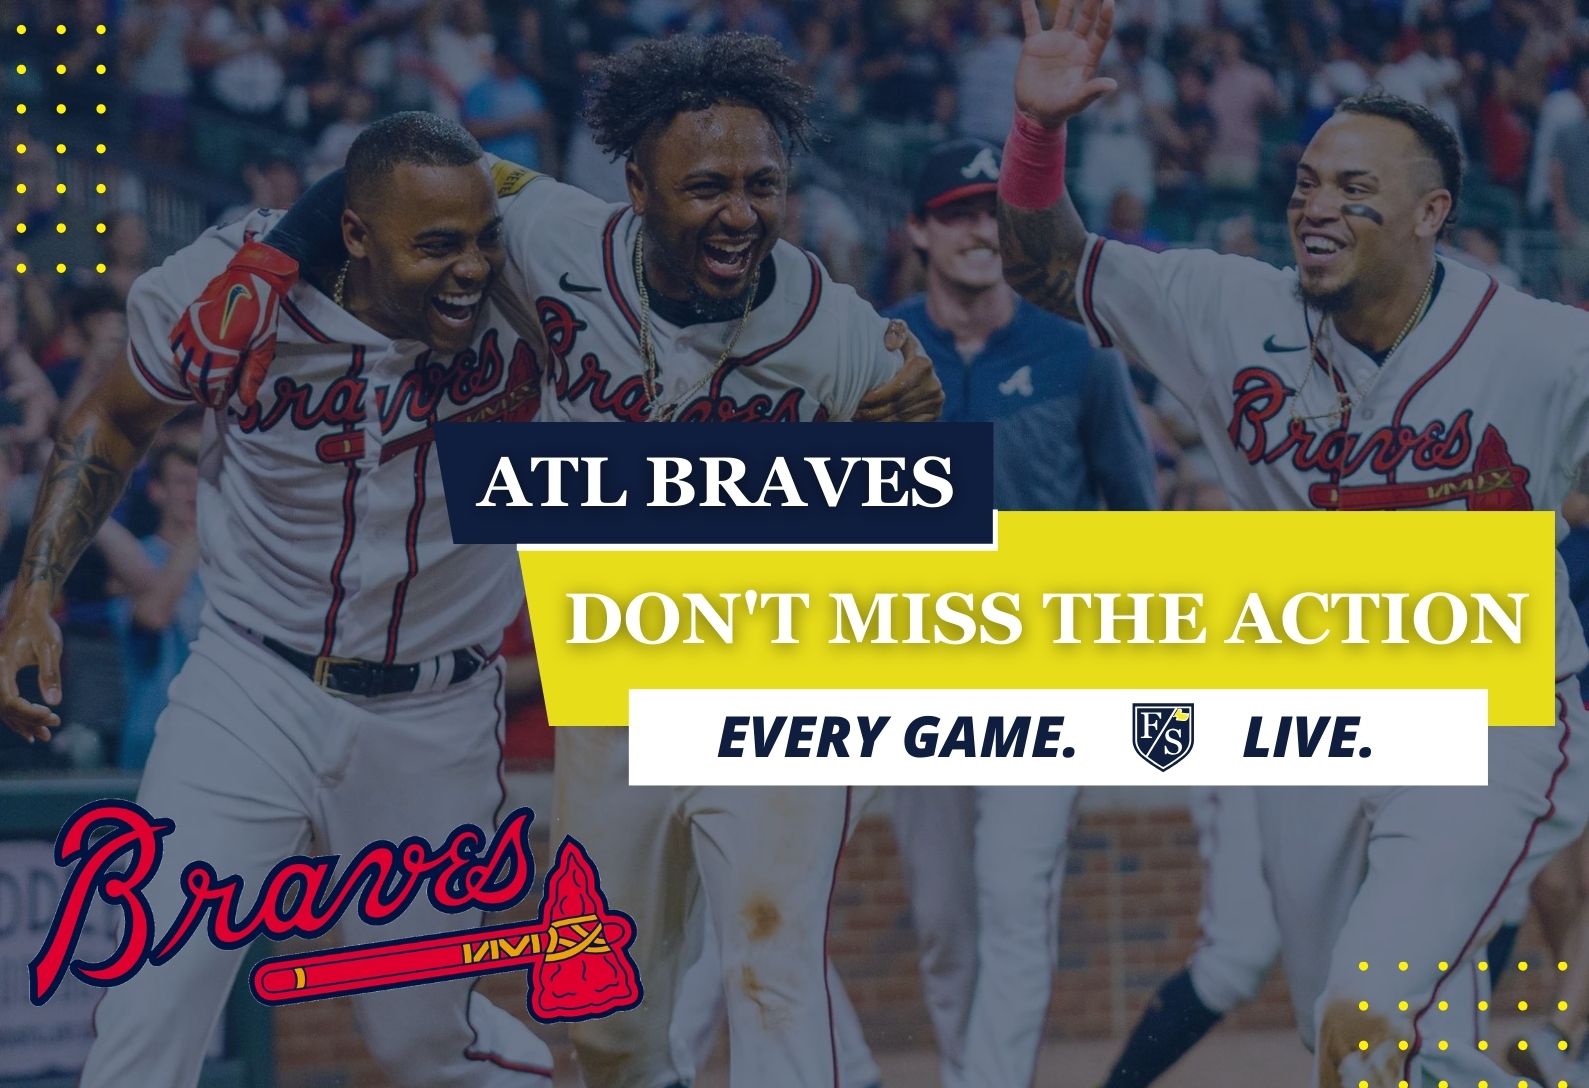 WATCH THE BRAVES LIVE